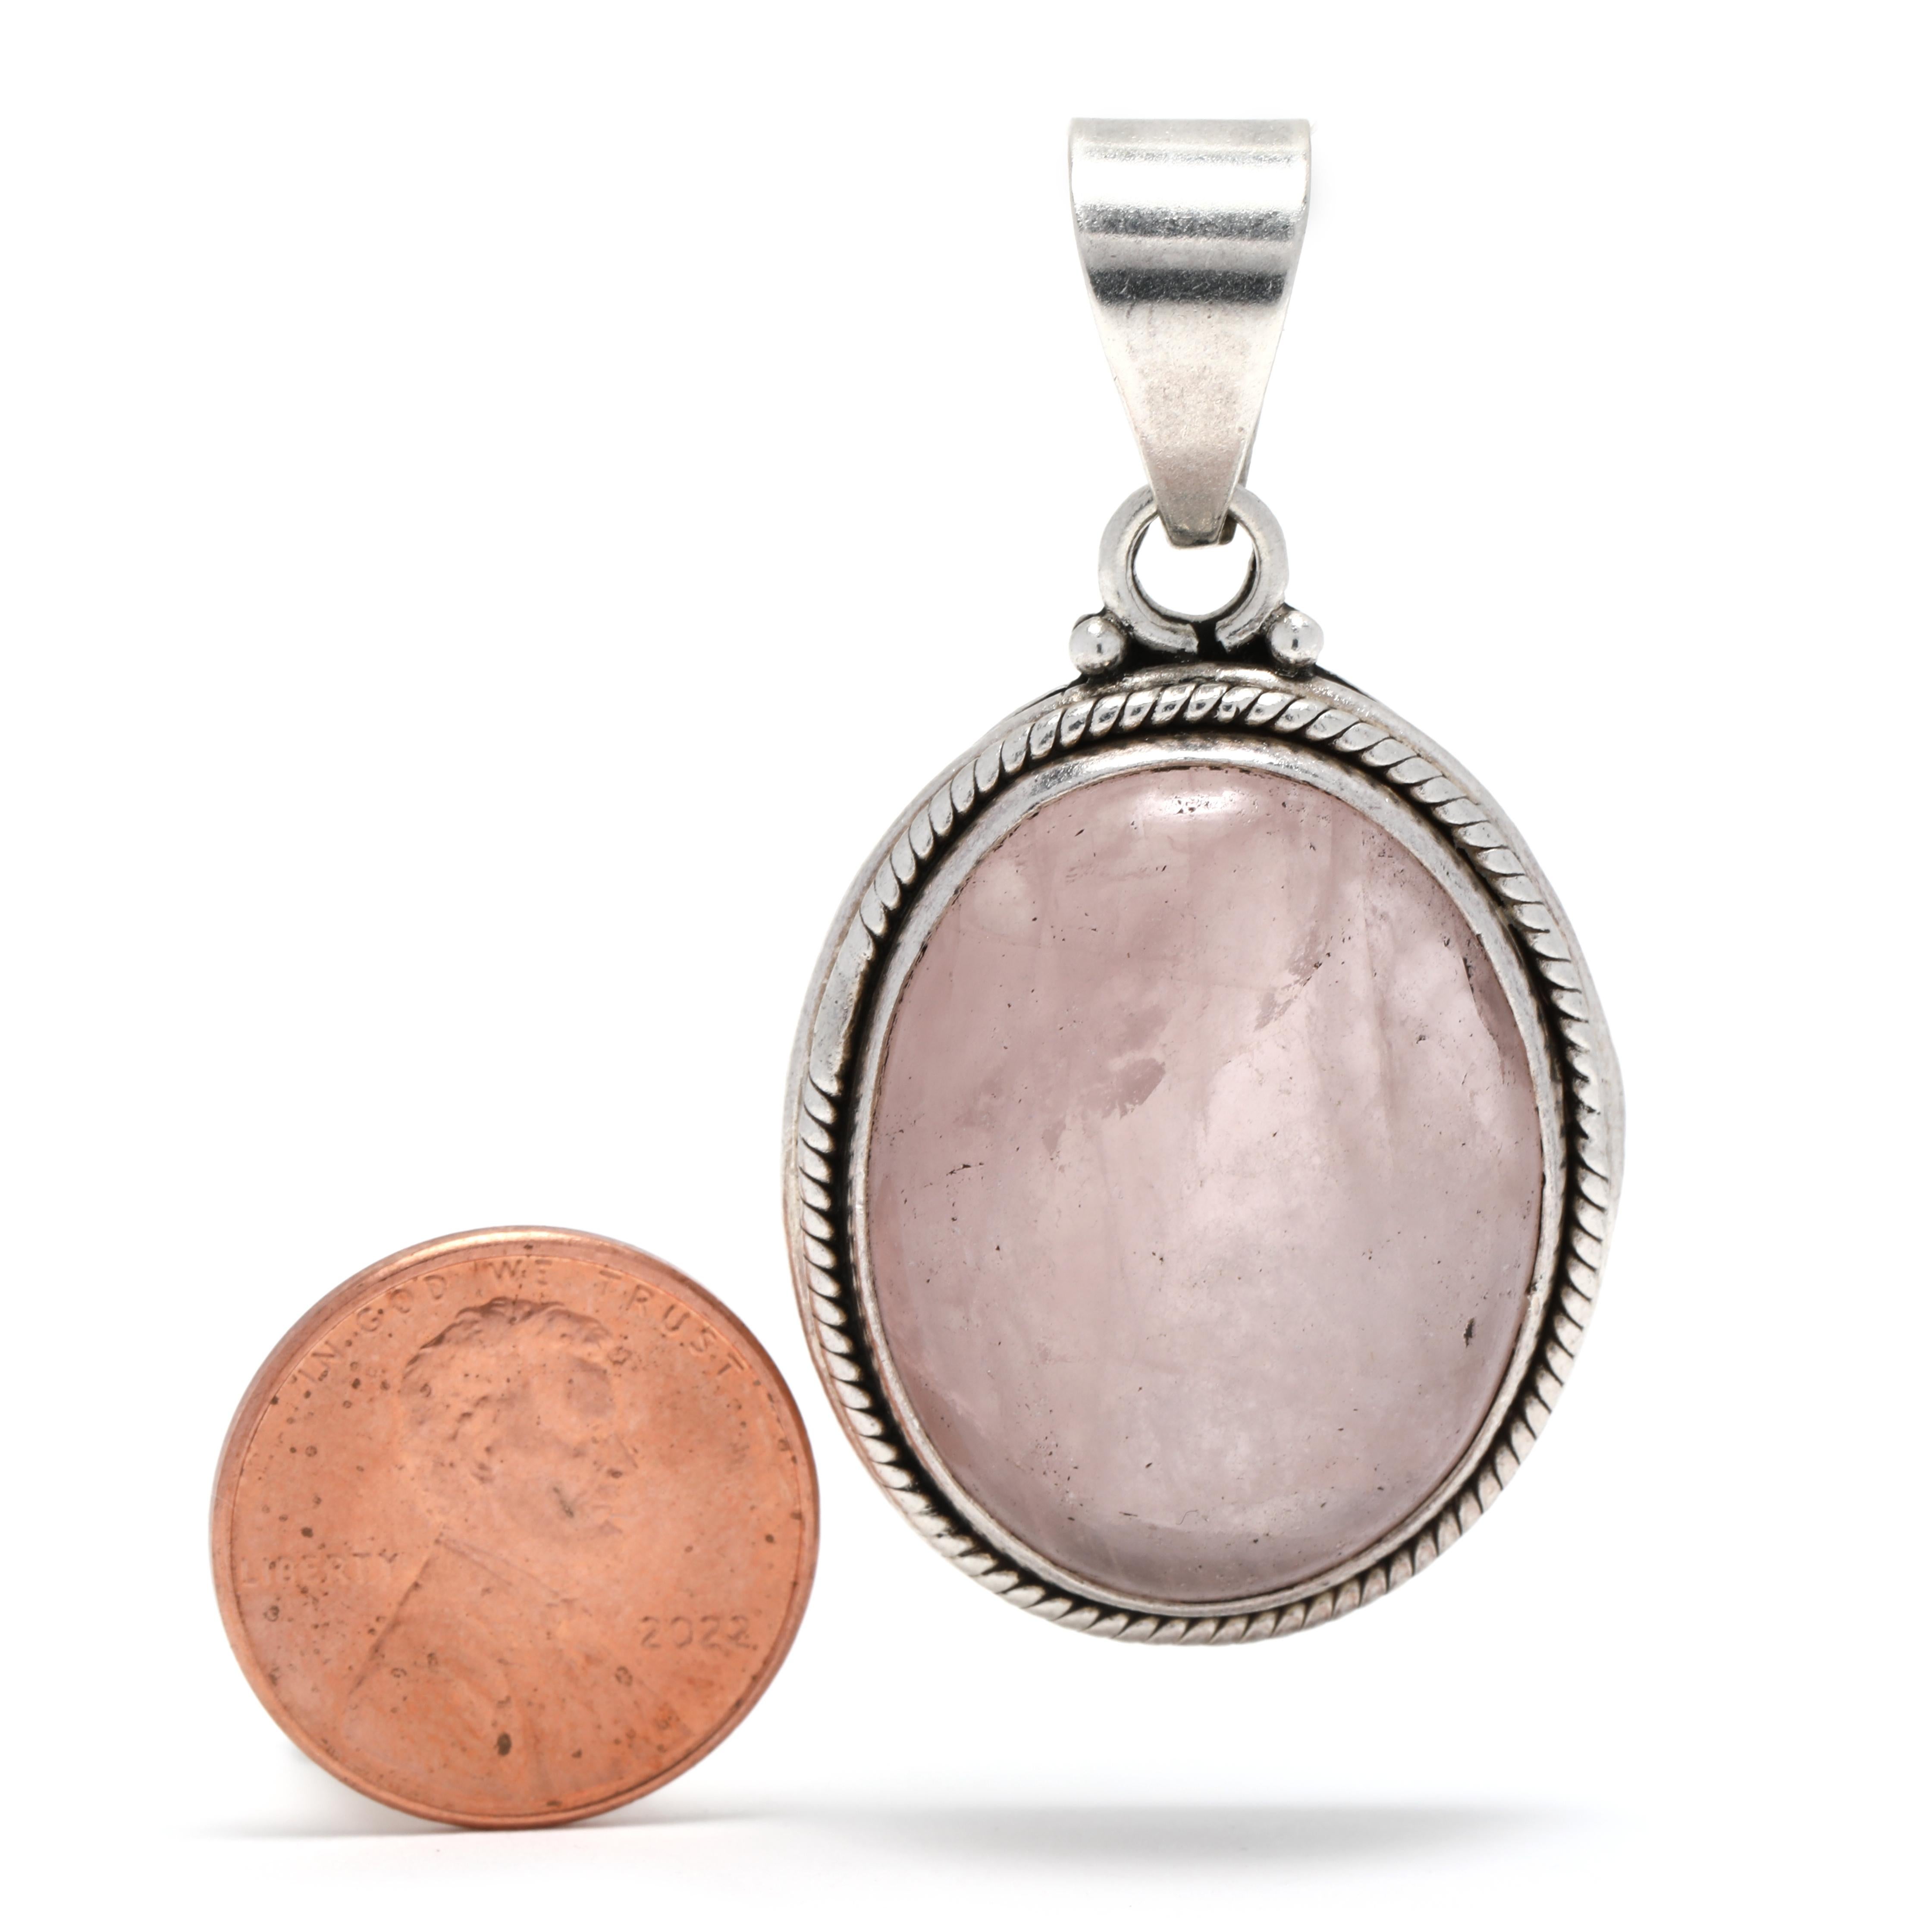 This stunning vintage large rose quartz pendant is a show stopper! Crafted in sterling silver, the pendant features a beautiful 35ct rose quartz stone, bezel set in the center. The pink stone has a gorgeous color and clarity that will look amazing